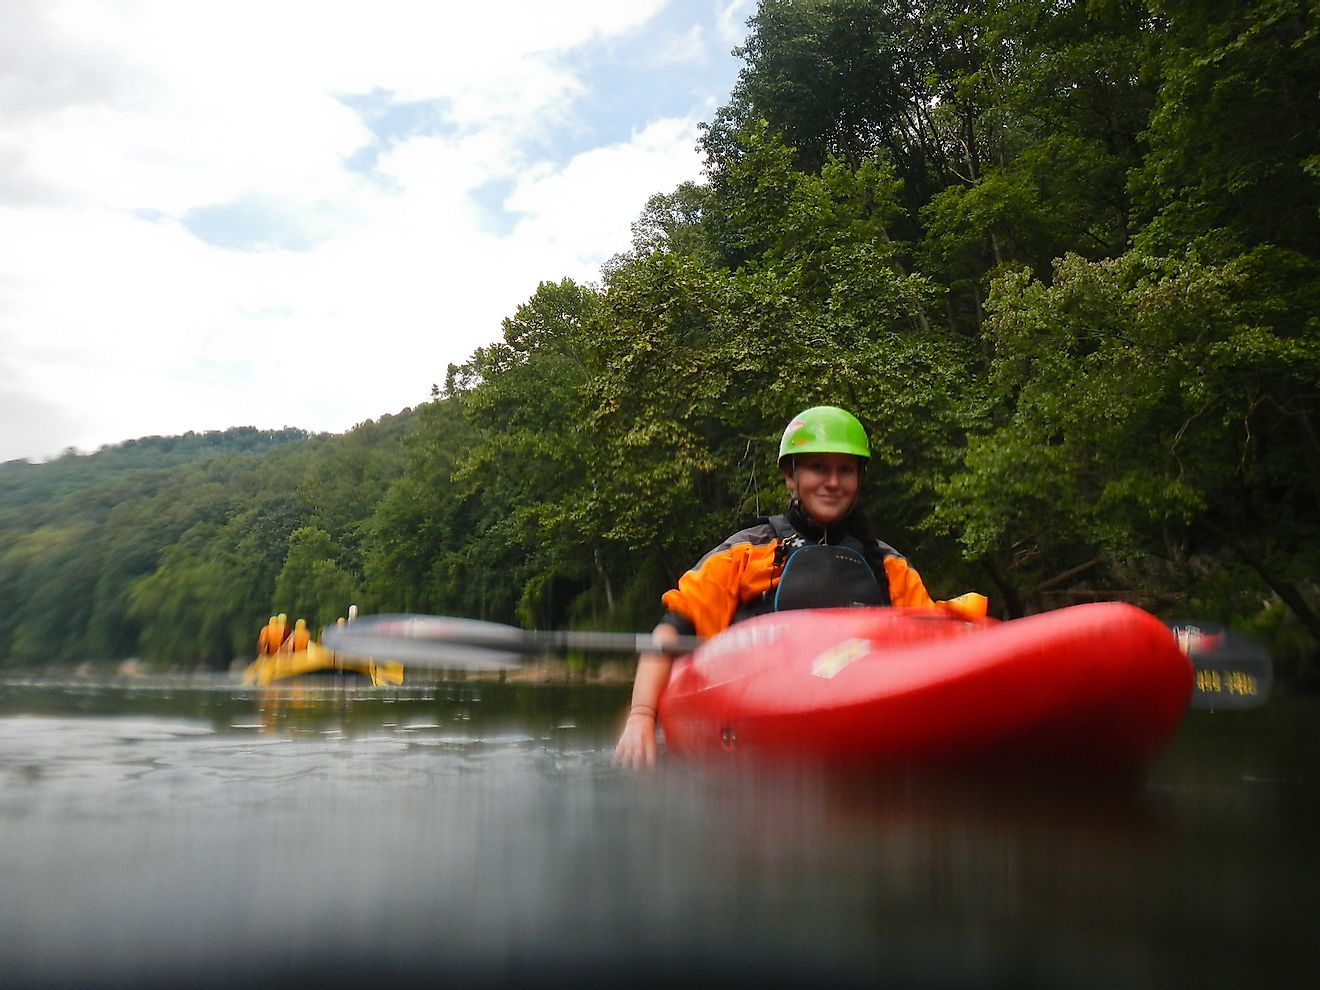 Whitewater Rafting the lower Youghiogheny river. Image credit: Sk/Flickr.com